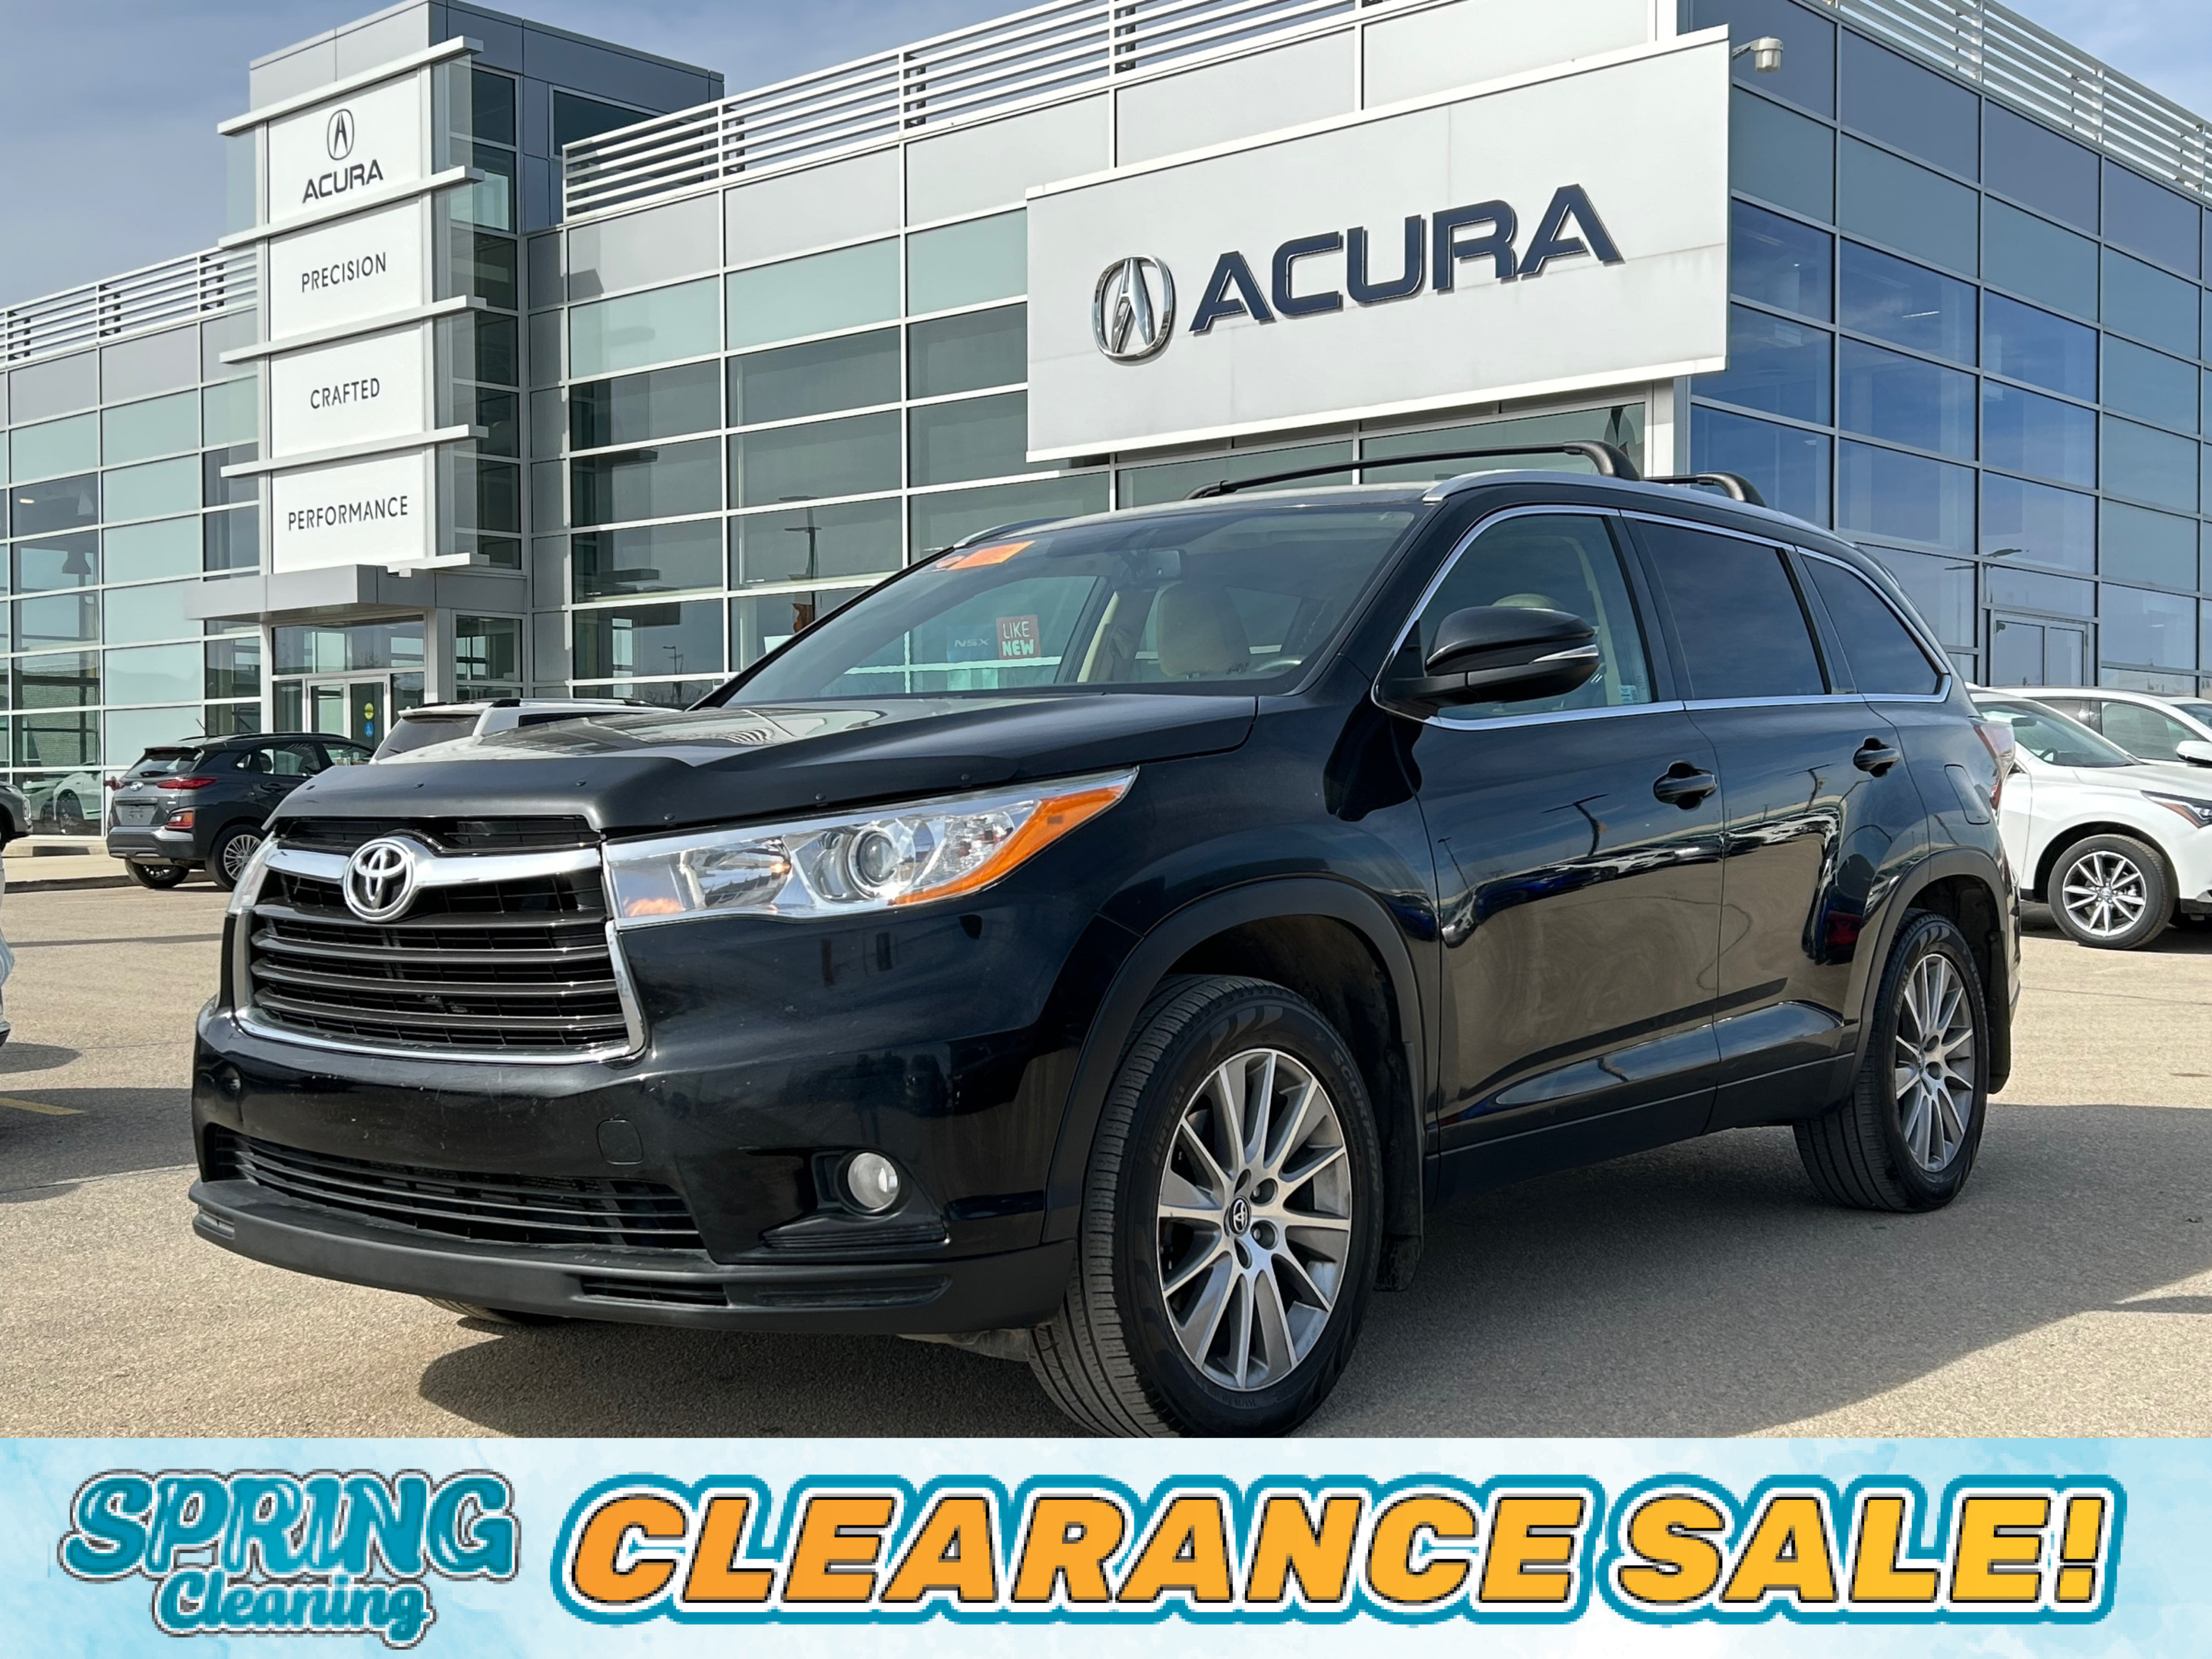 2016 Toyota Highlander XLE BUDGET FRIENDLY, RELIABLE 7 SEATER!